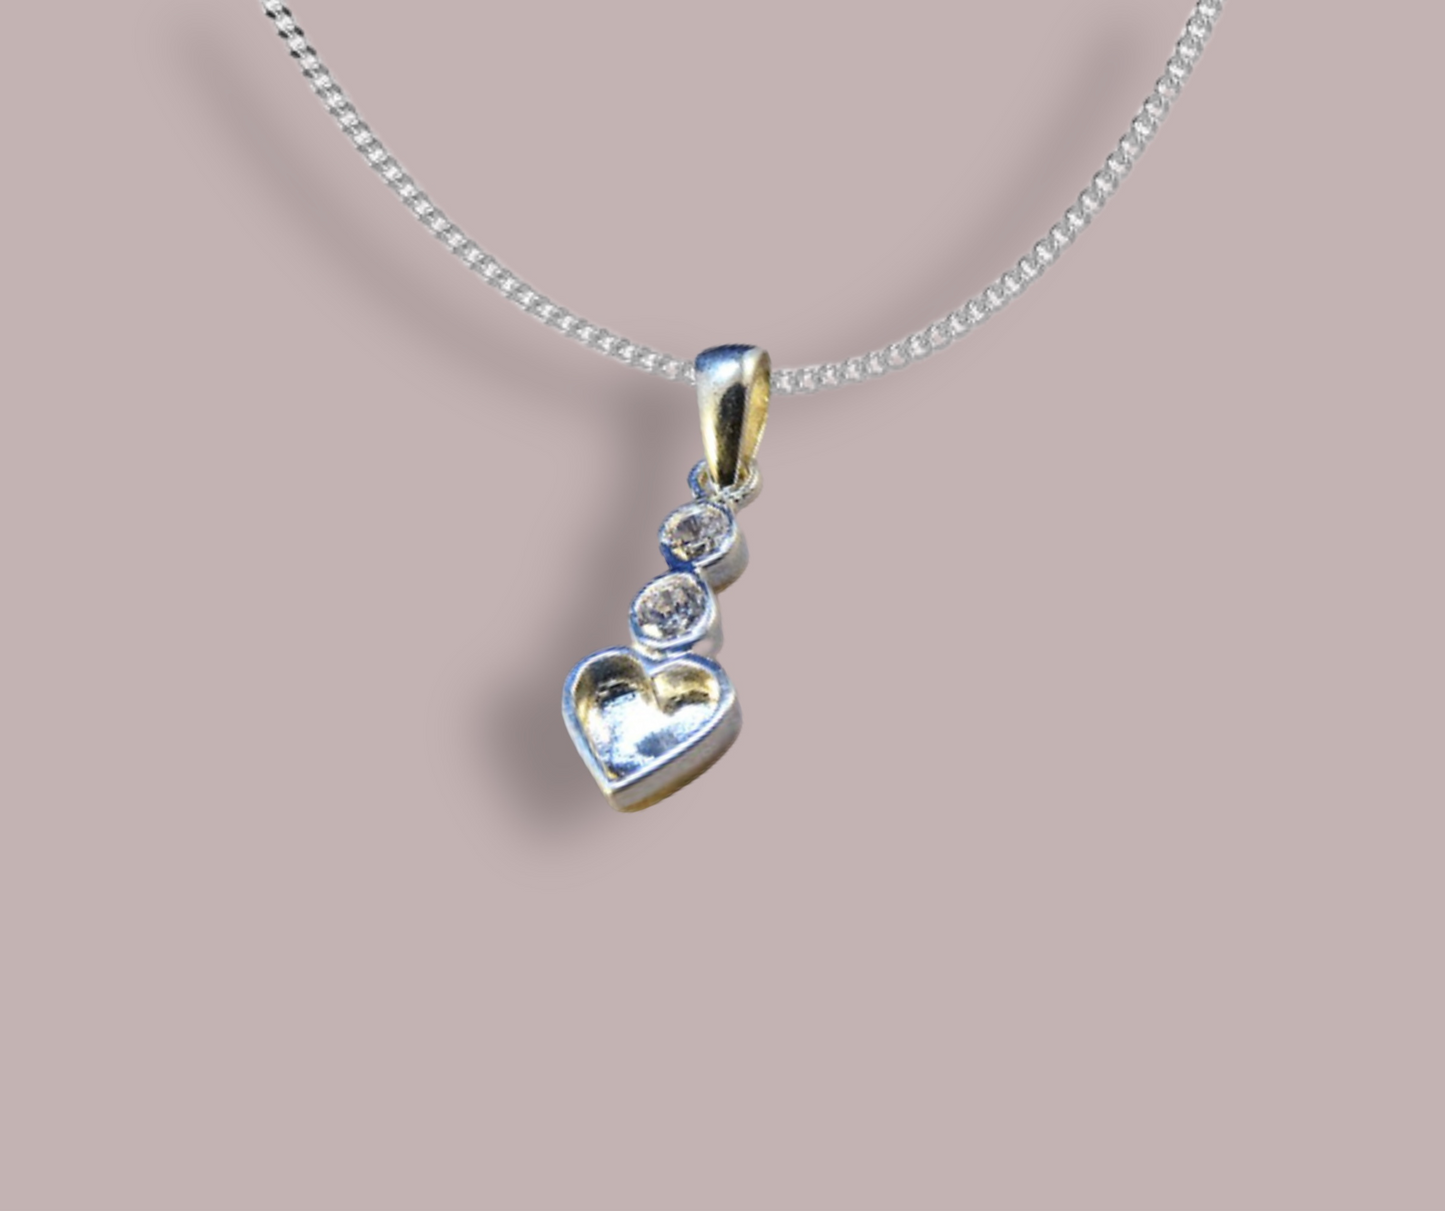 The dainty heart drop necklace